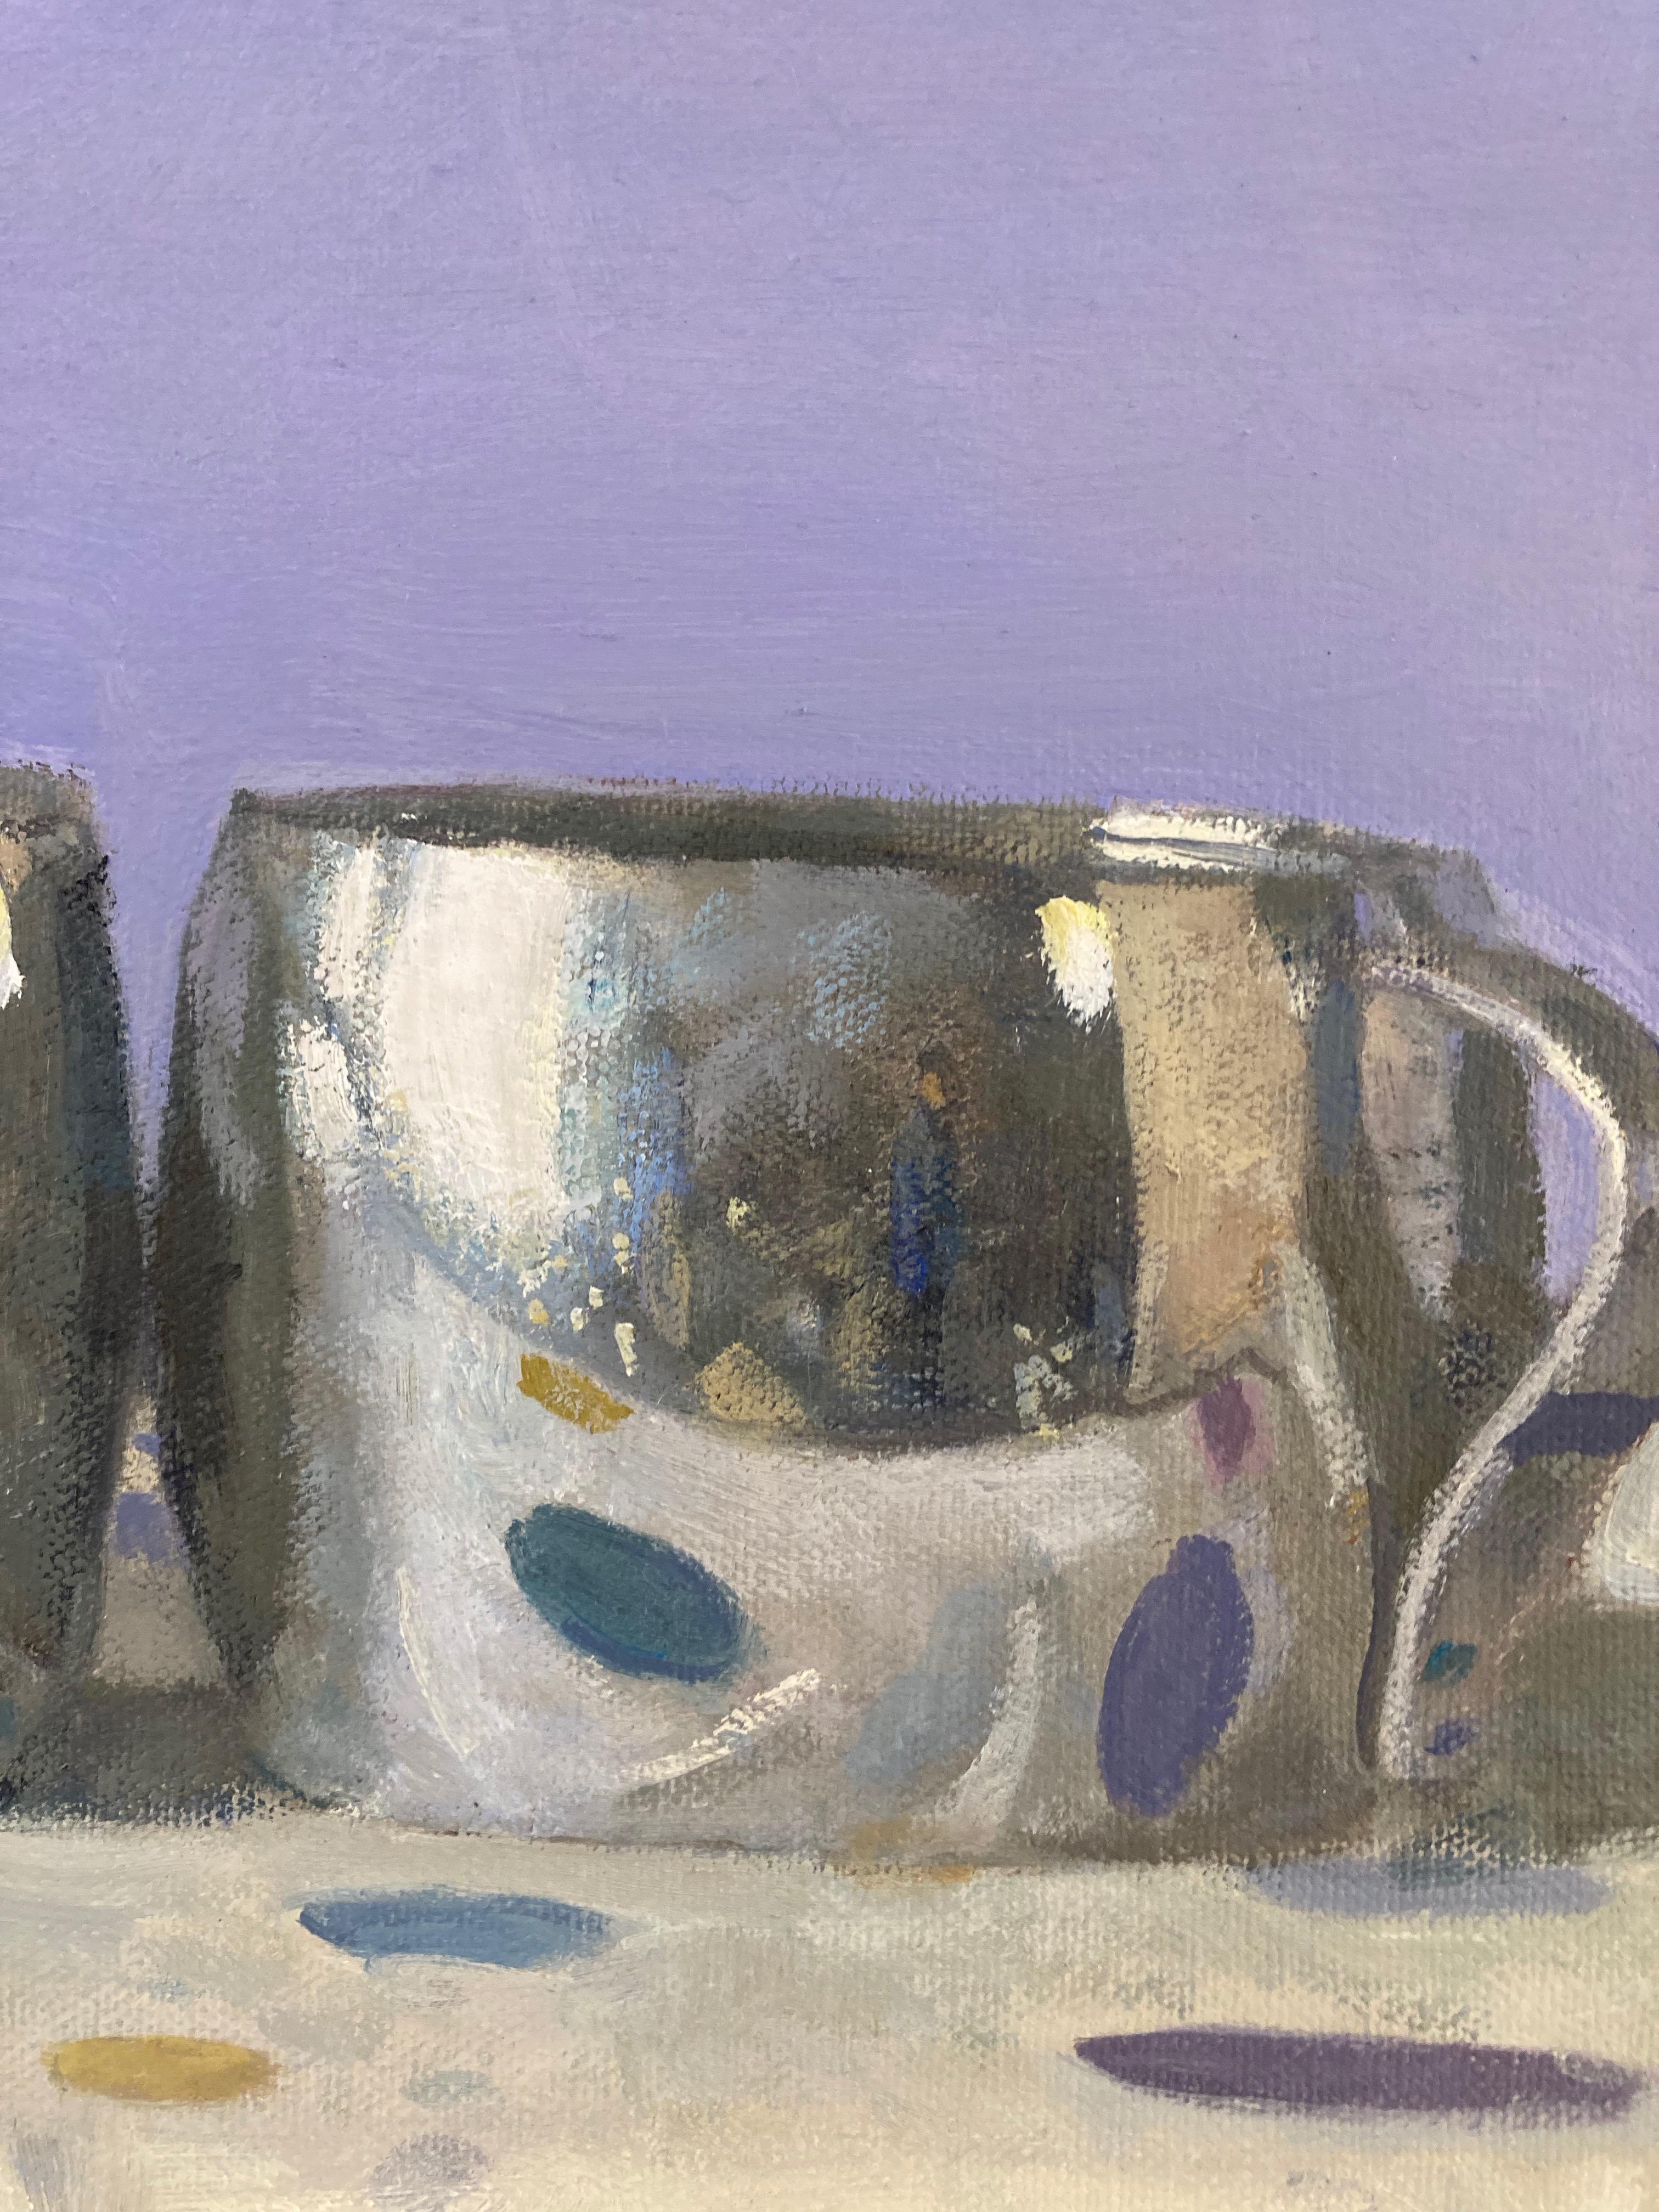 
Olga Antonova’s subject is compositions of extraordinarily elegant, beautiful and whimsical cups, plates, teapots, and dishes, but there is something playful about these paintings.   Stacked teacups are also amusing, having a kind of jaunty and